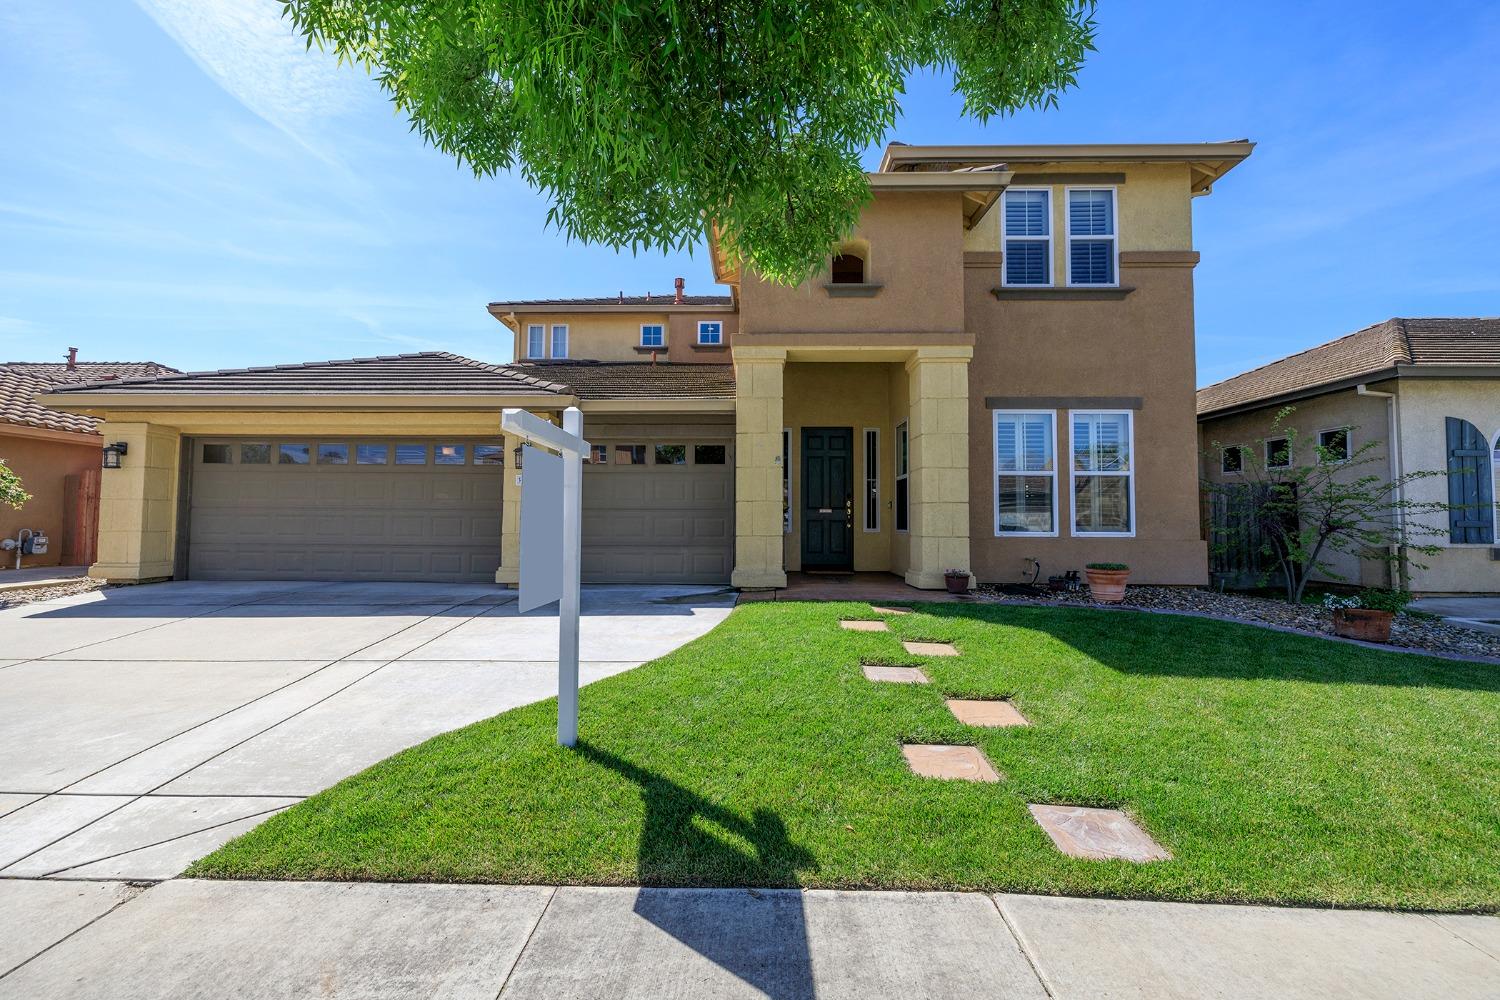 Photo of 3874 Eau Clair Ave in Ceres, CA